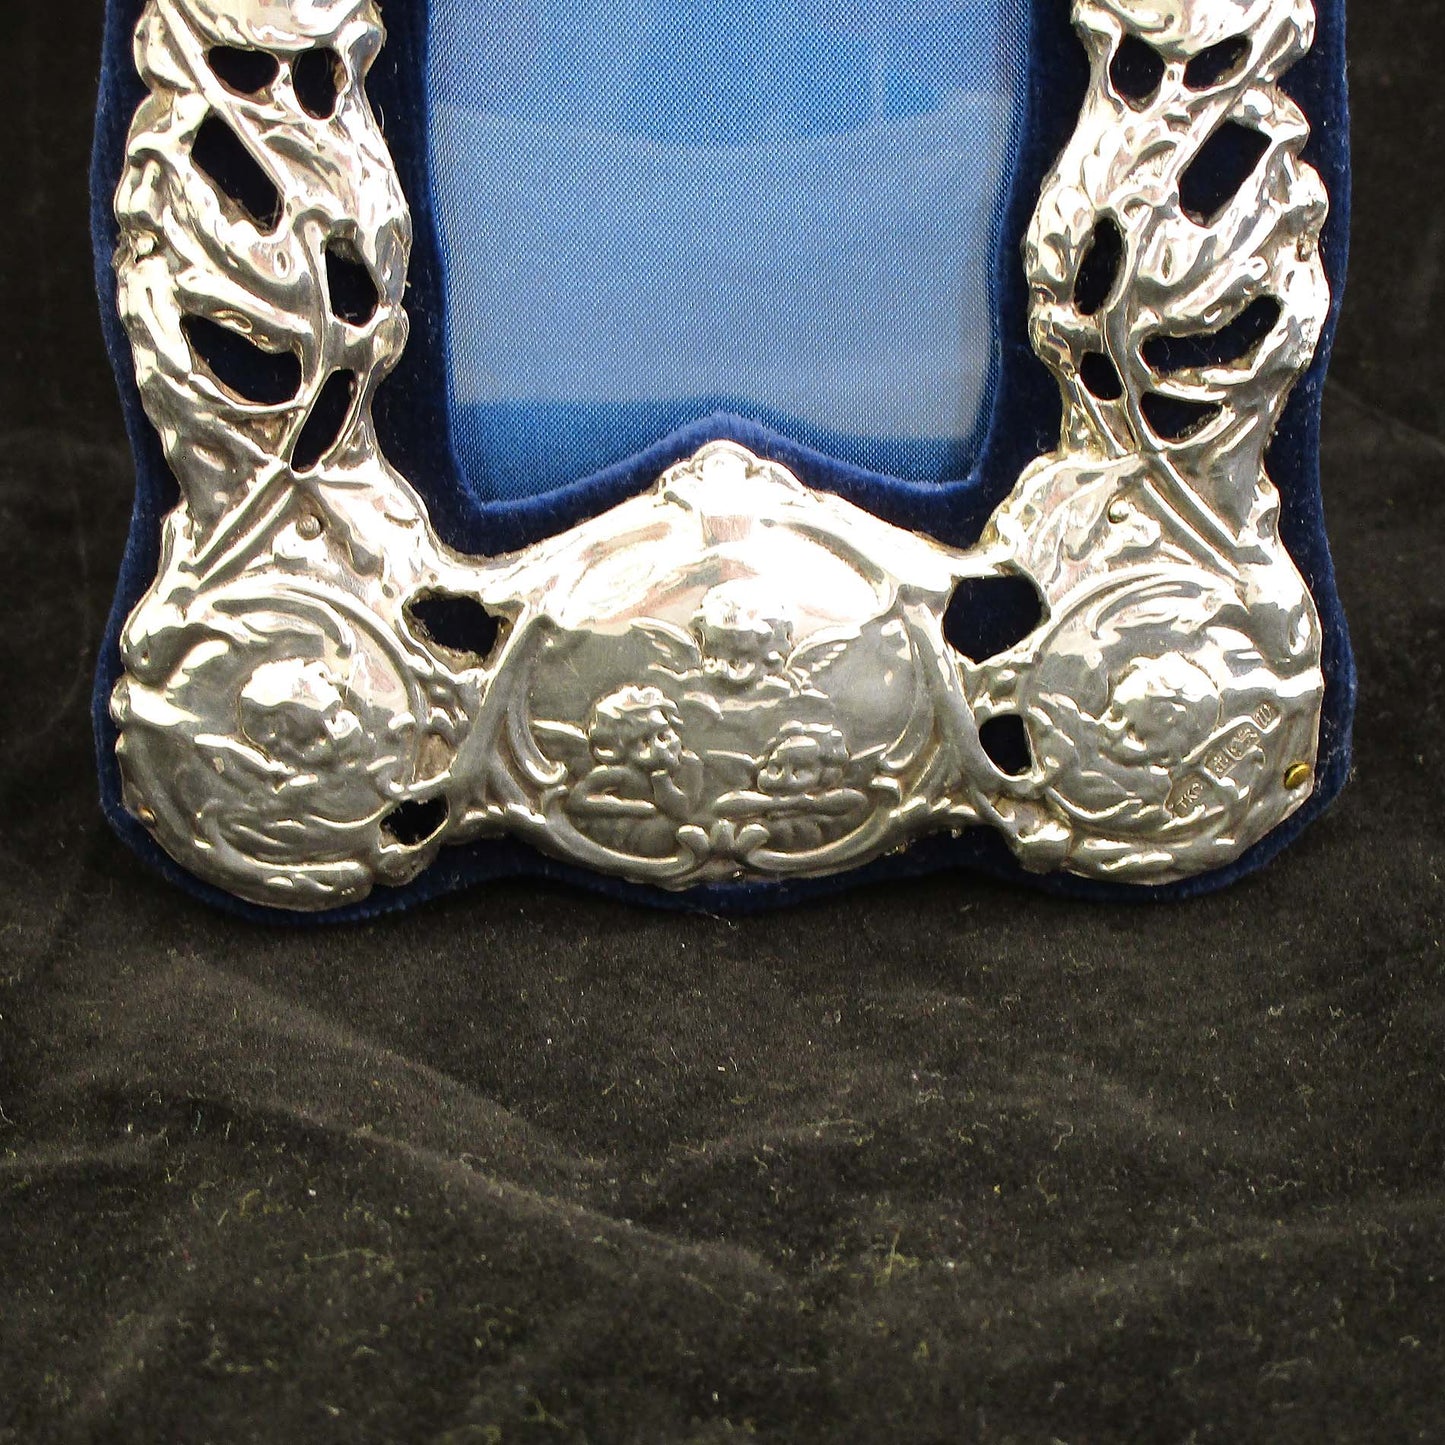 Sterling silver picture frame